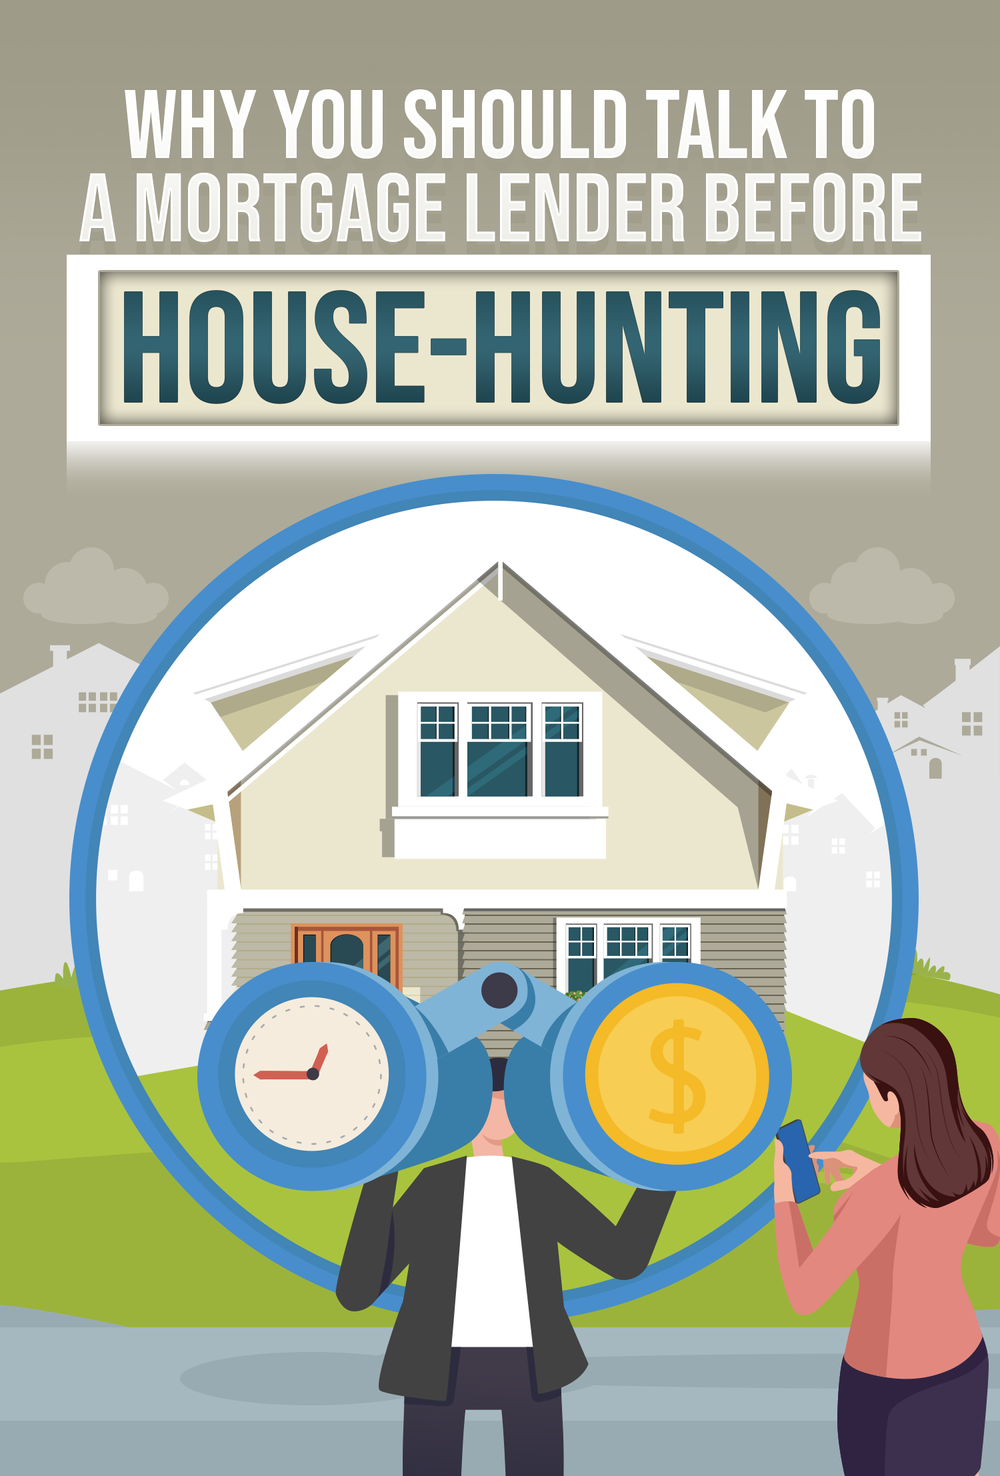 consult a mortgage lender before house hunting